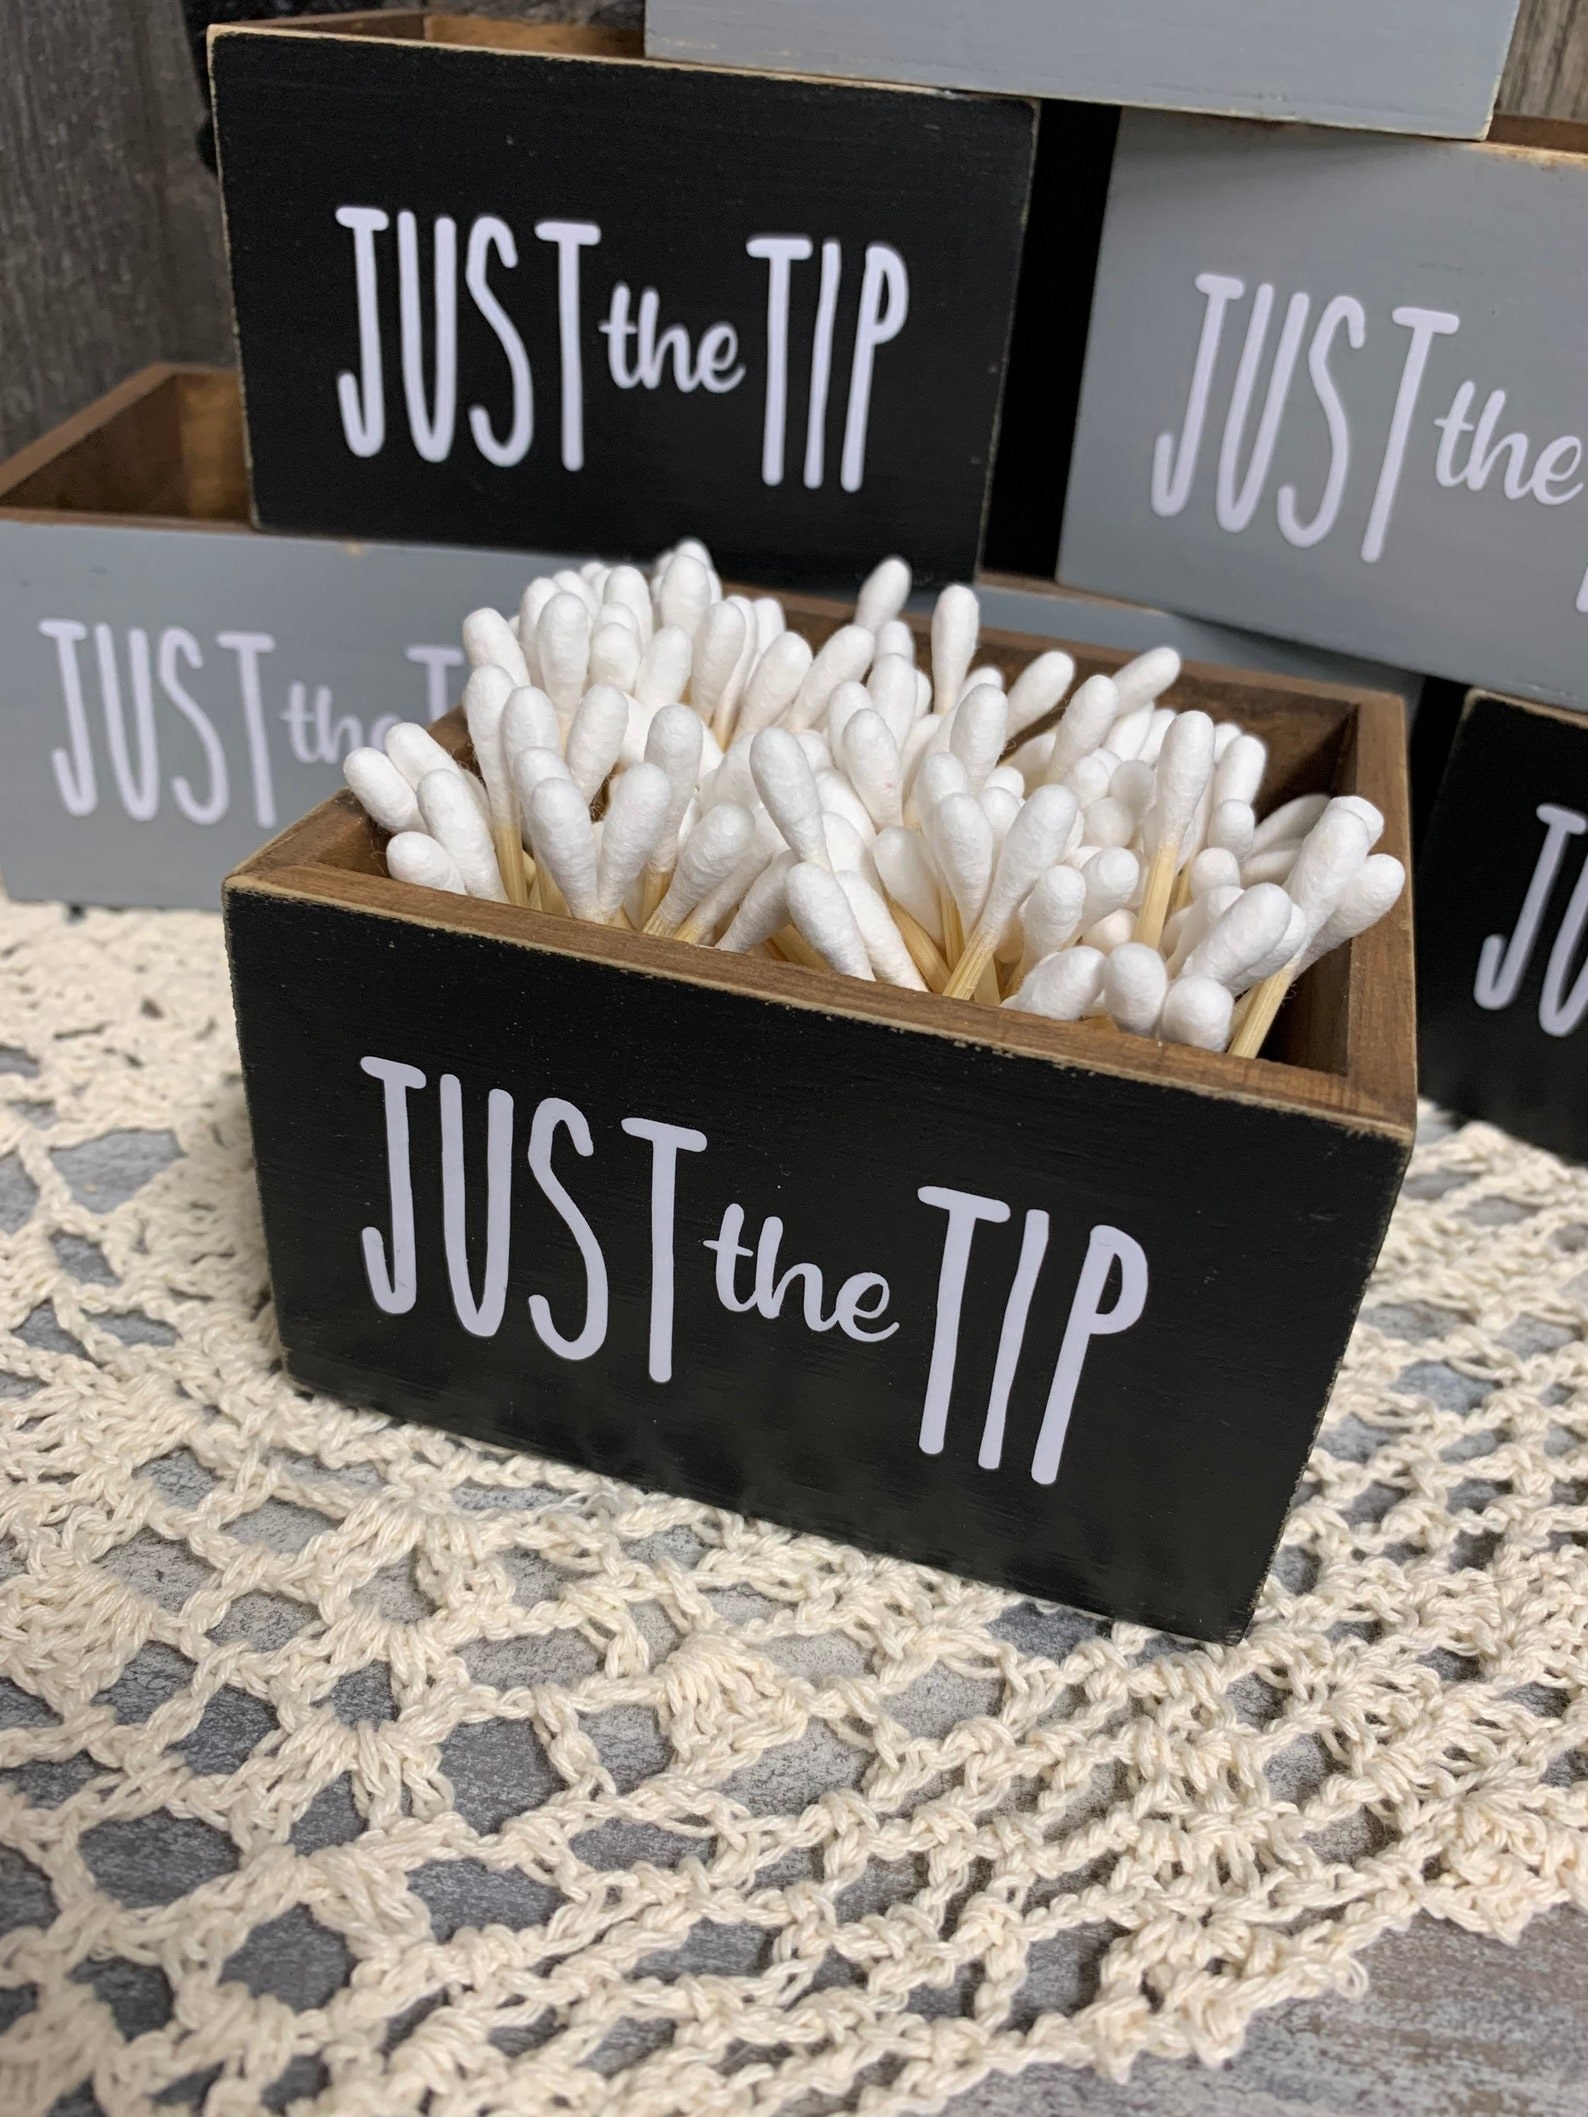 The black &quot;Just The Tip&quot; cotton swab holder in front of a stack of black and gray cotton swab holders